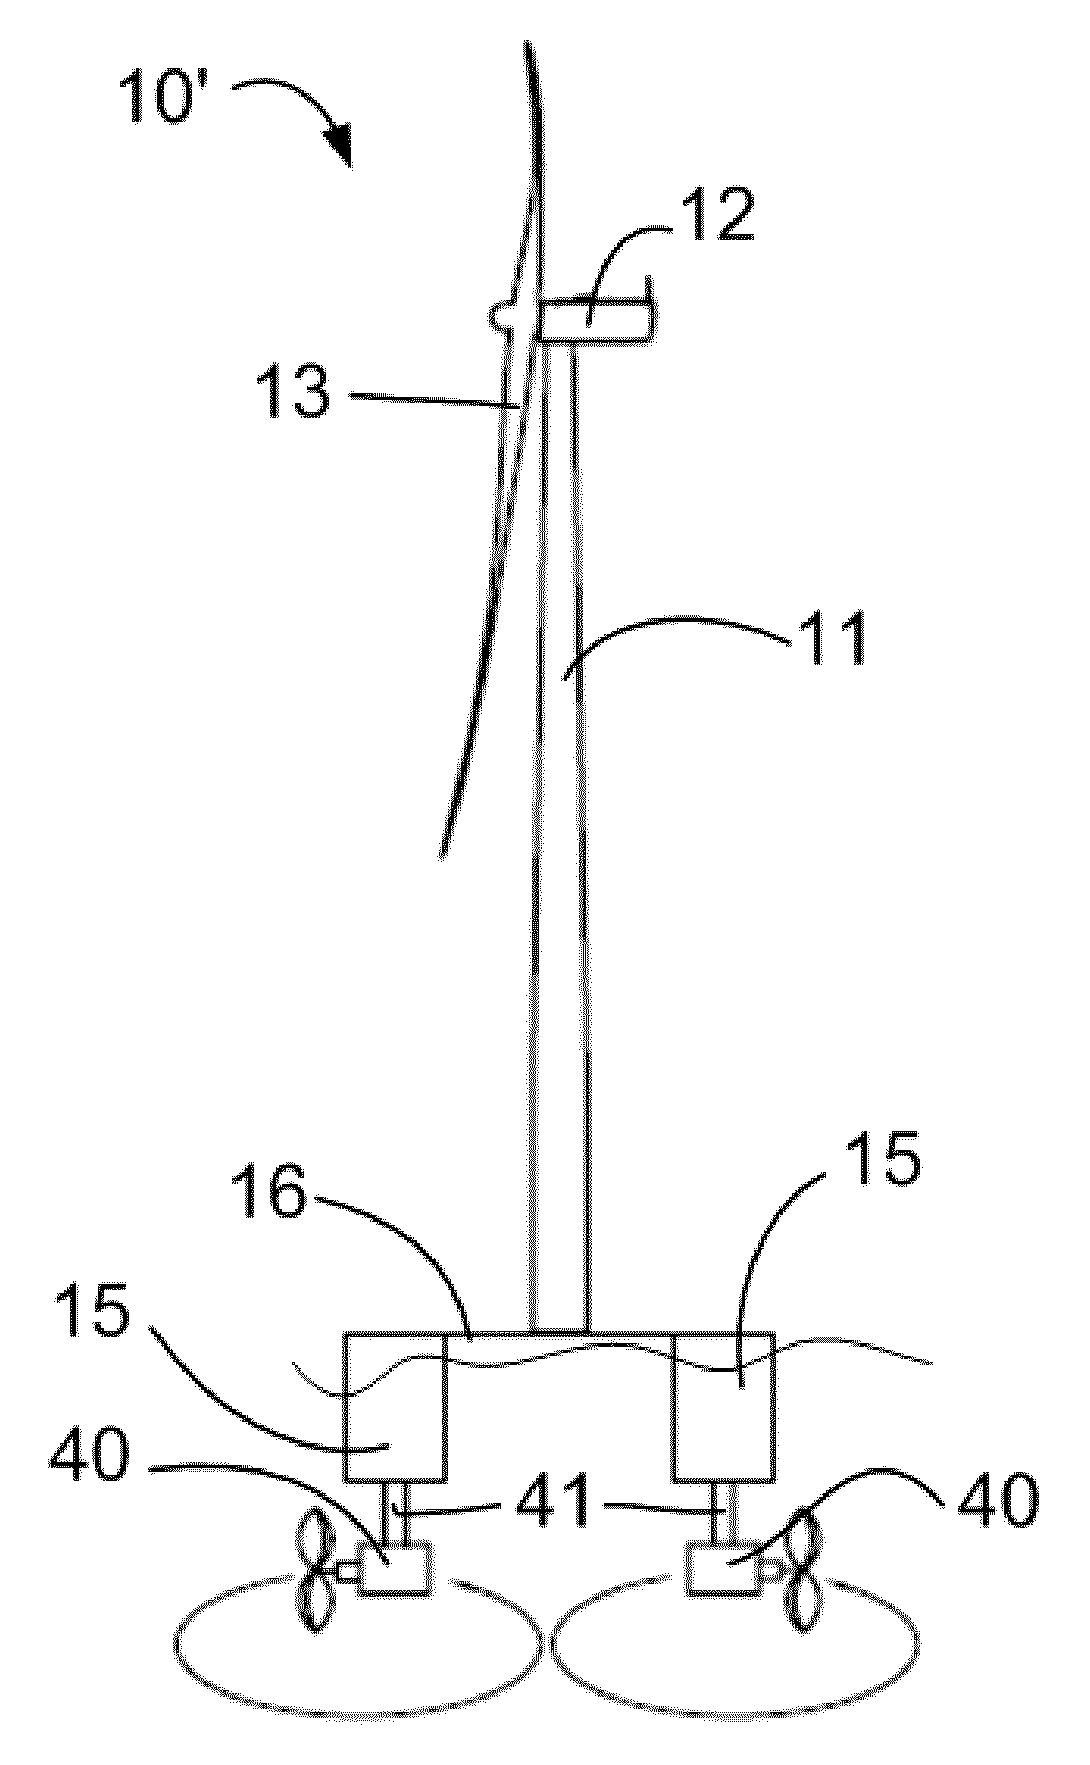 Method for reducing oscillations in offshore wind turbines